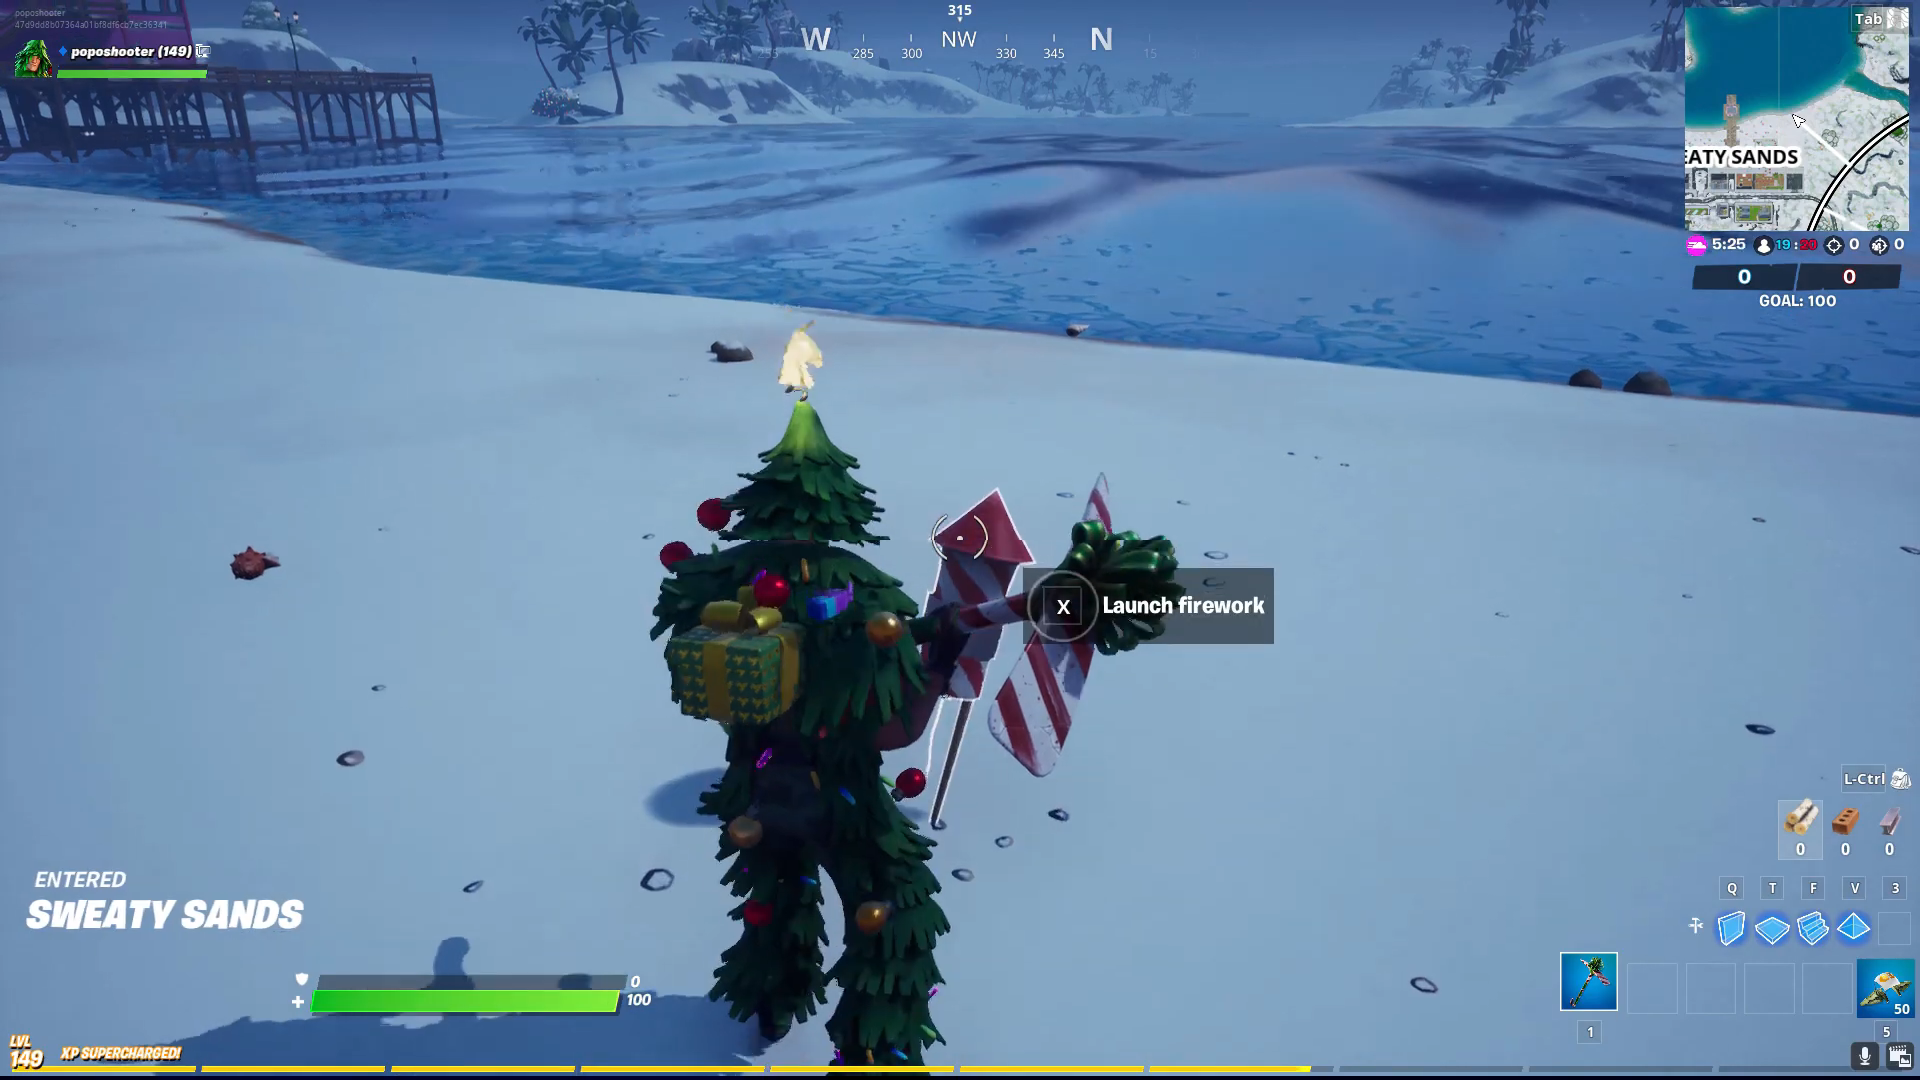 'Fortnite' Frozen Firework Locations to Light at Sweaty ...